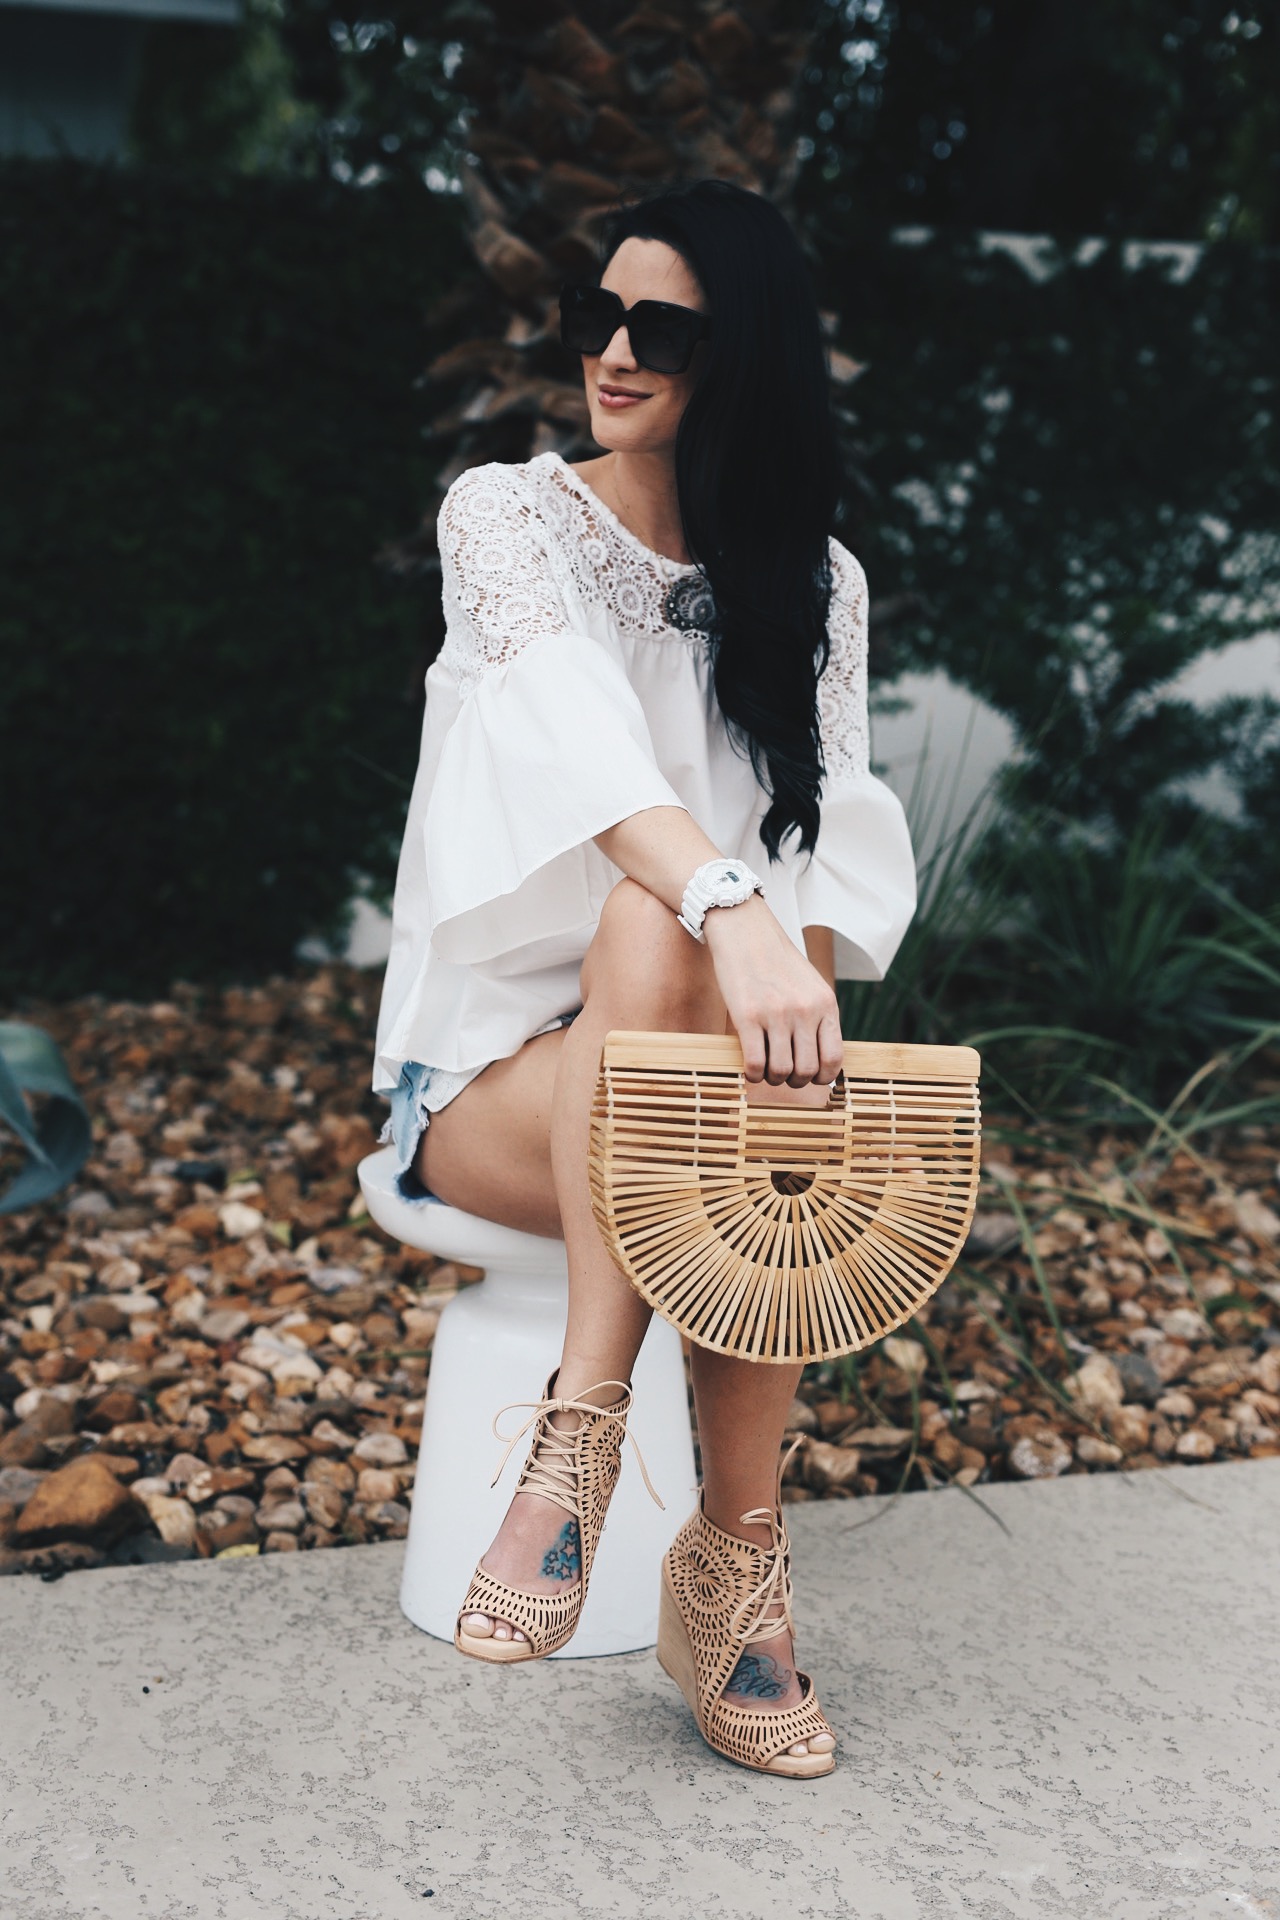 DTKAustin shares why she has always loved G Shock watches by Casio and why you need to invest in one for your summer wardrobe. || Dressed to Kill #summerstyle #summerfashion #summeroutfit - G Shock Smart Watch review by popular Austin style blogger Dressed to Kill